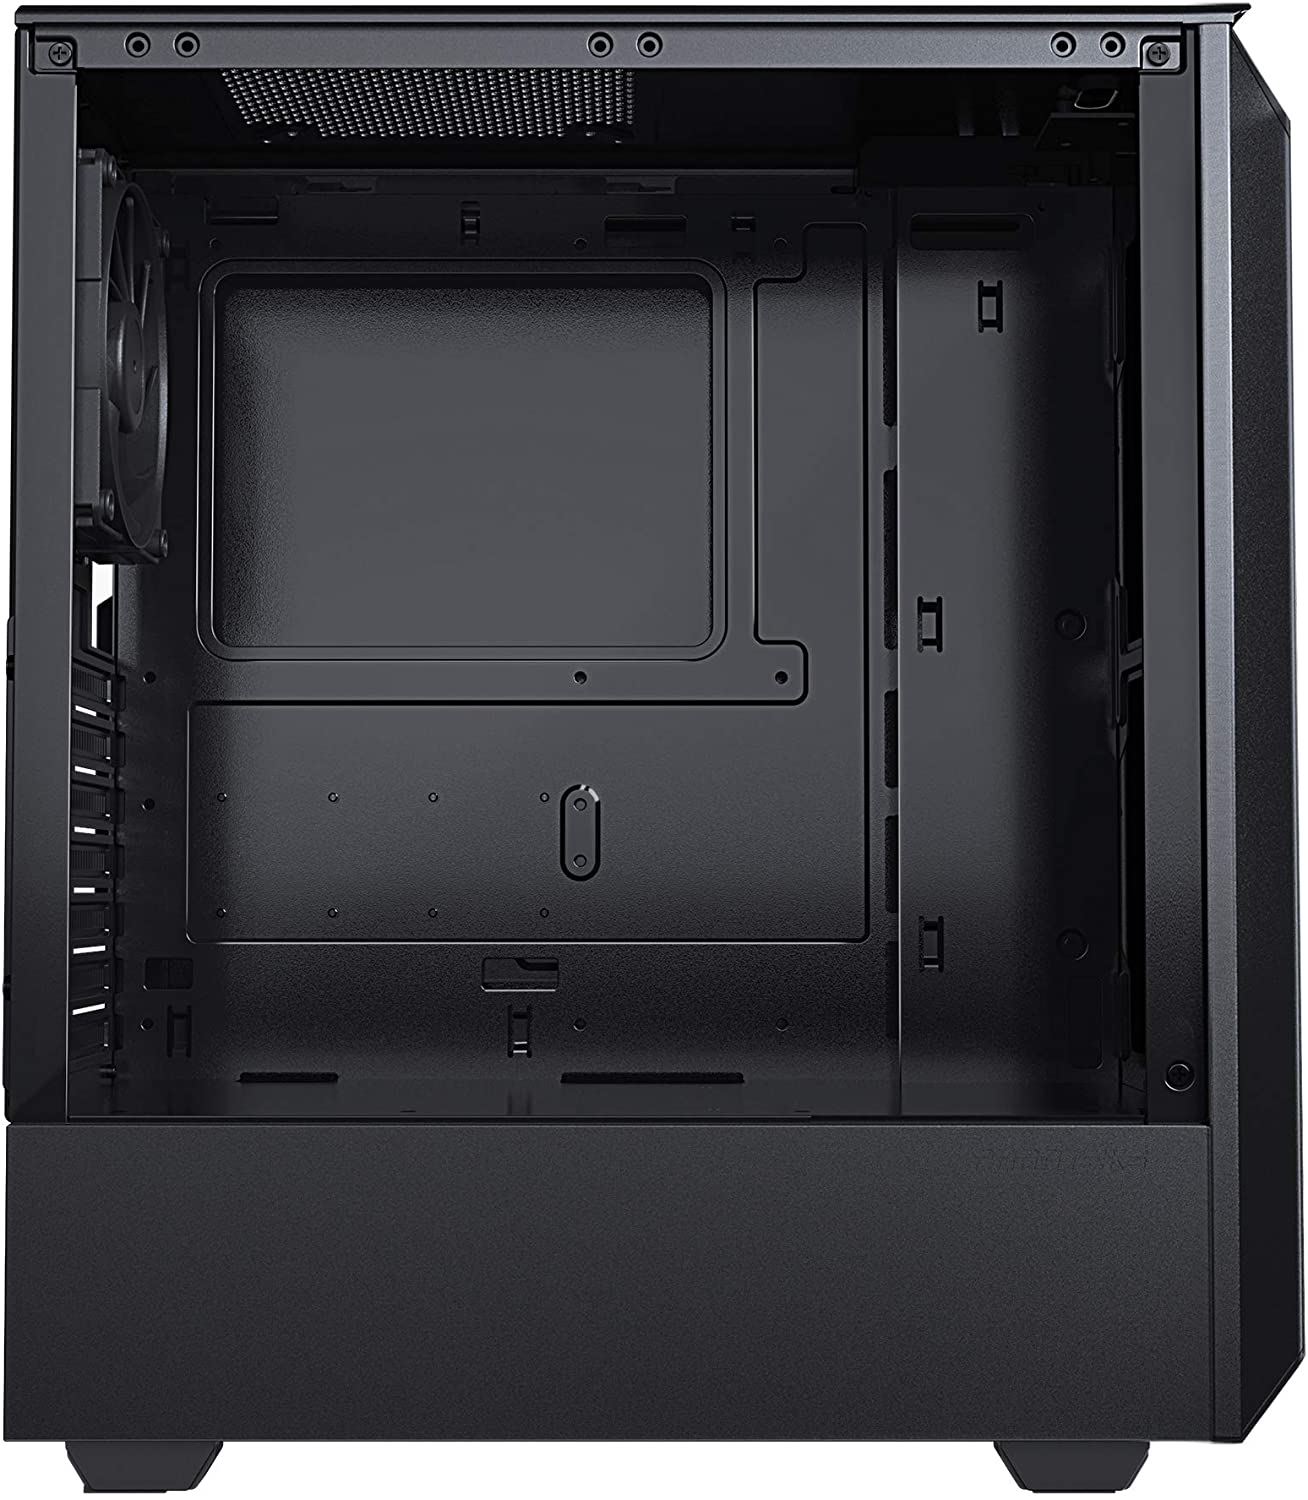 Phanteks Eclipse P300A (PH-EC300ATG_BK01)Mid-Tower PC Gaming Case with Tempered Glass Side Panel.